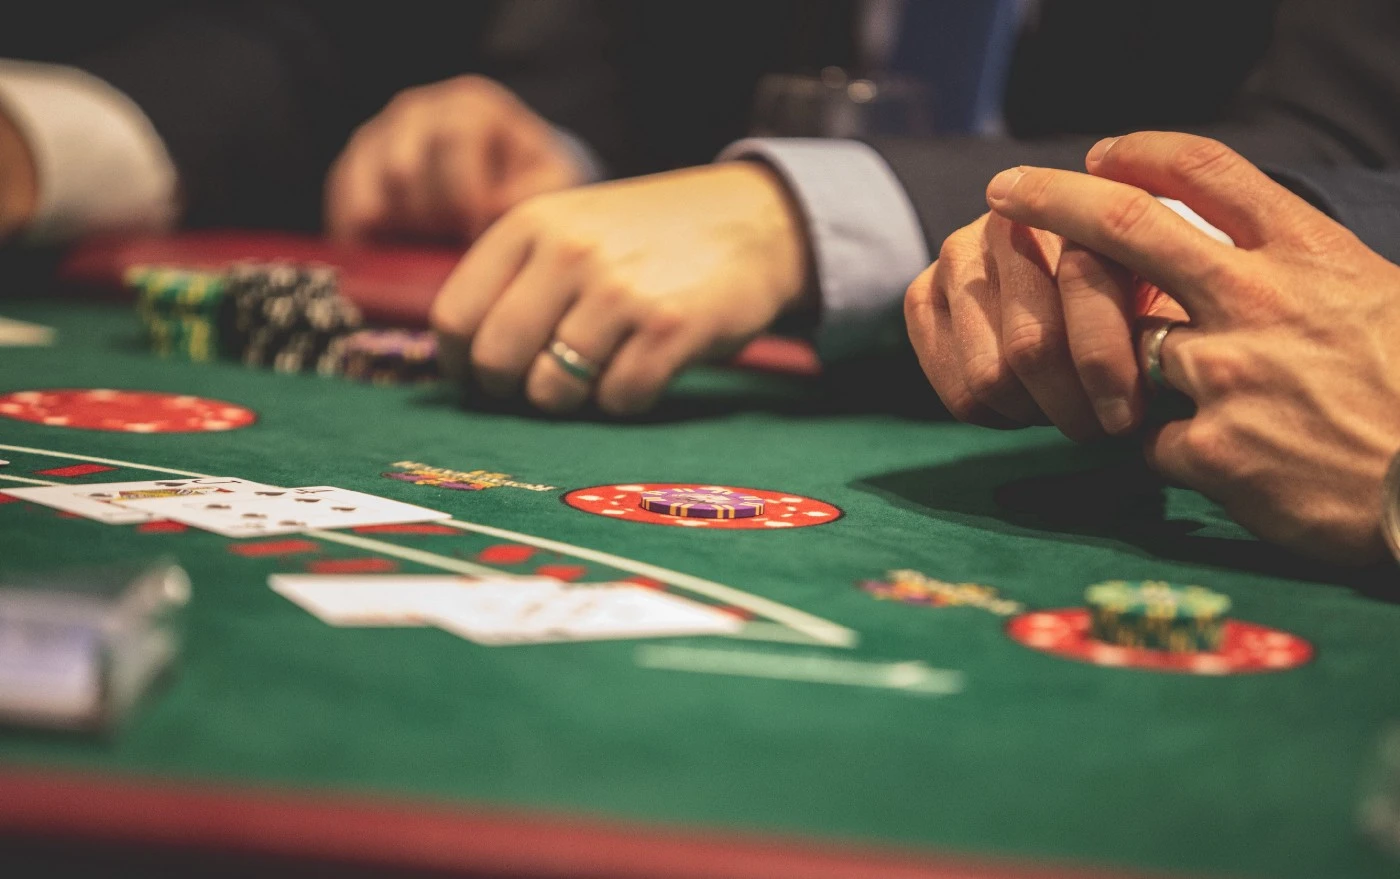 Do professional casino players pay taxes for their winnings